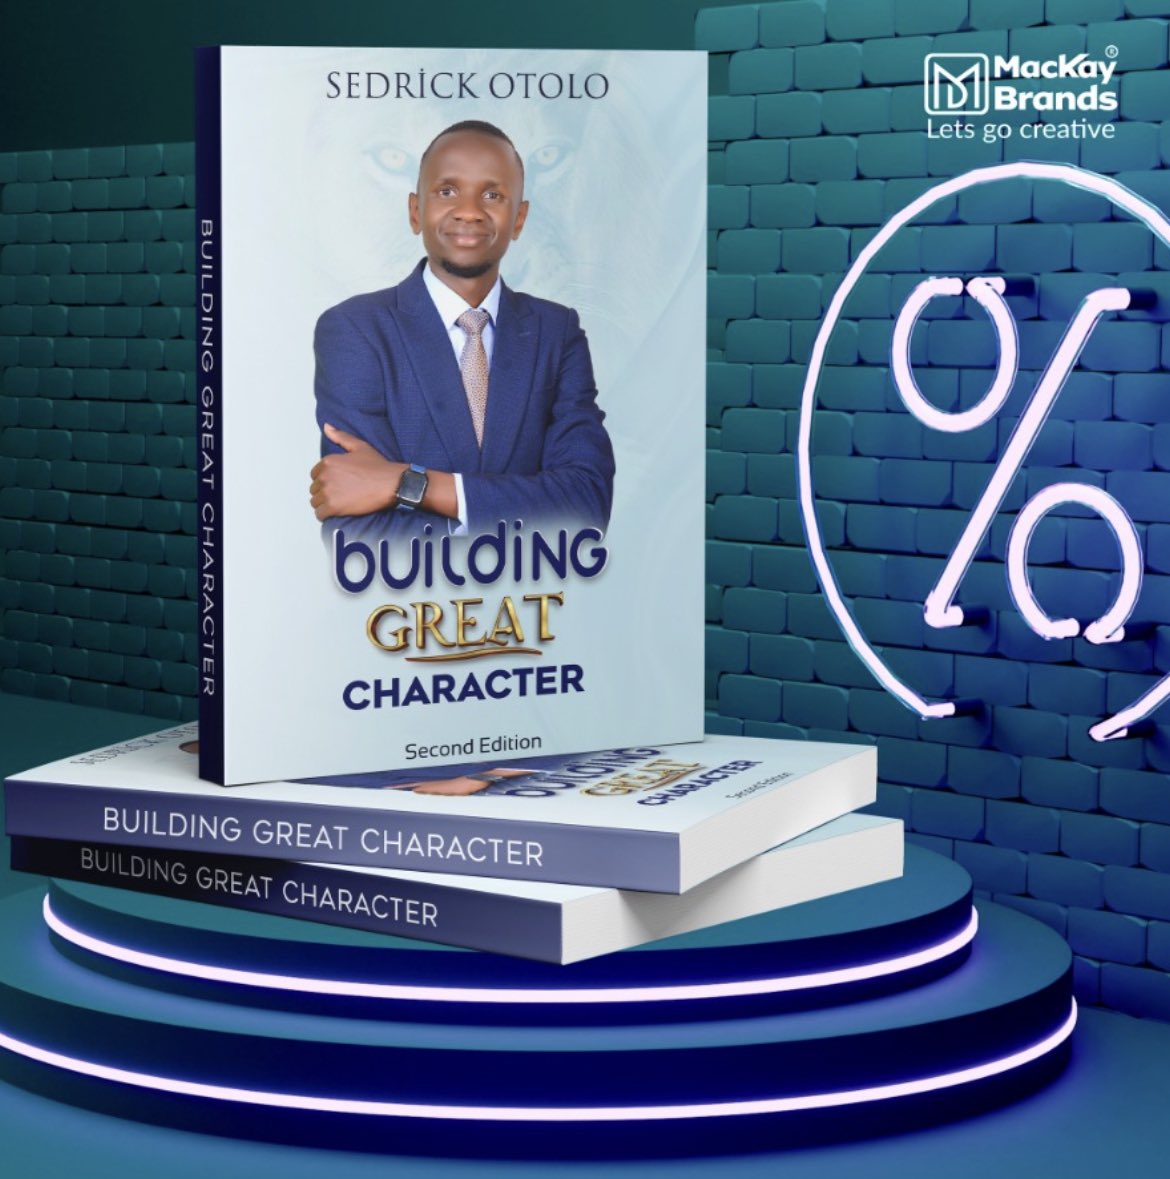 Good morning ! I am thrilled to reveal the stunning new cover for my upcoming book Building Great Character - Second Edition. Bookings on sedrickotolo.com Stay tuned for more updates on its release date next month #newbook #sedrickotolo #BGC2 #inspiringyouth.